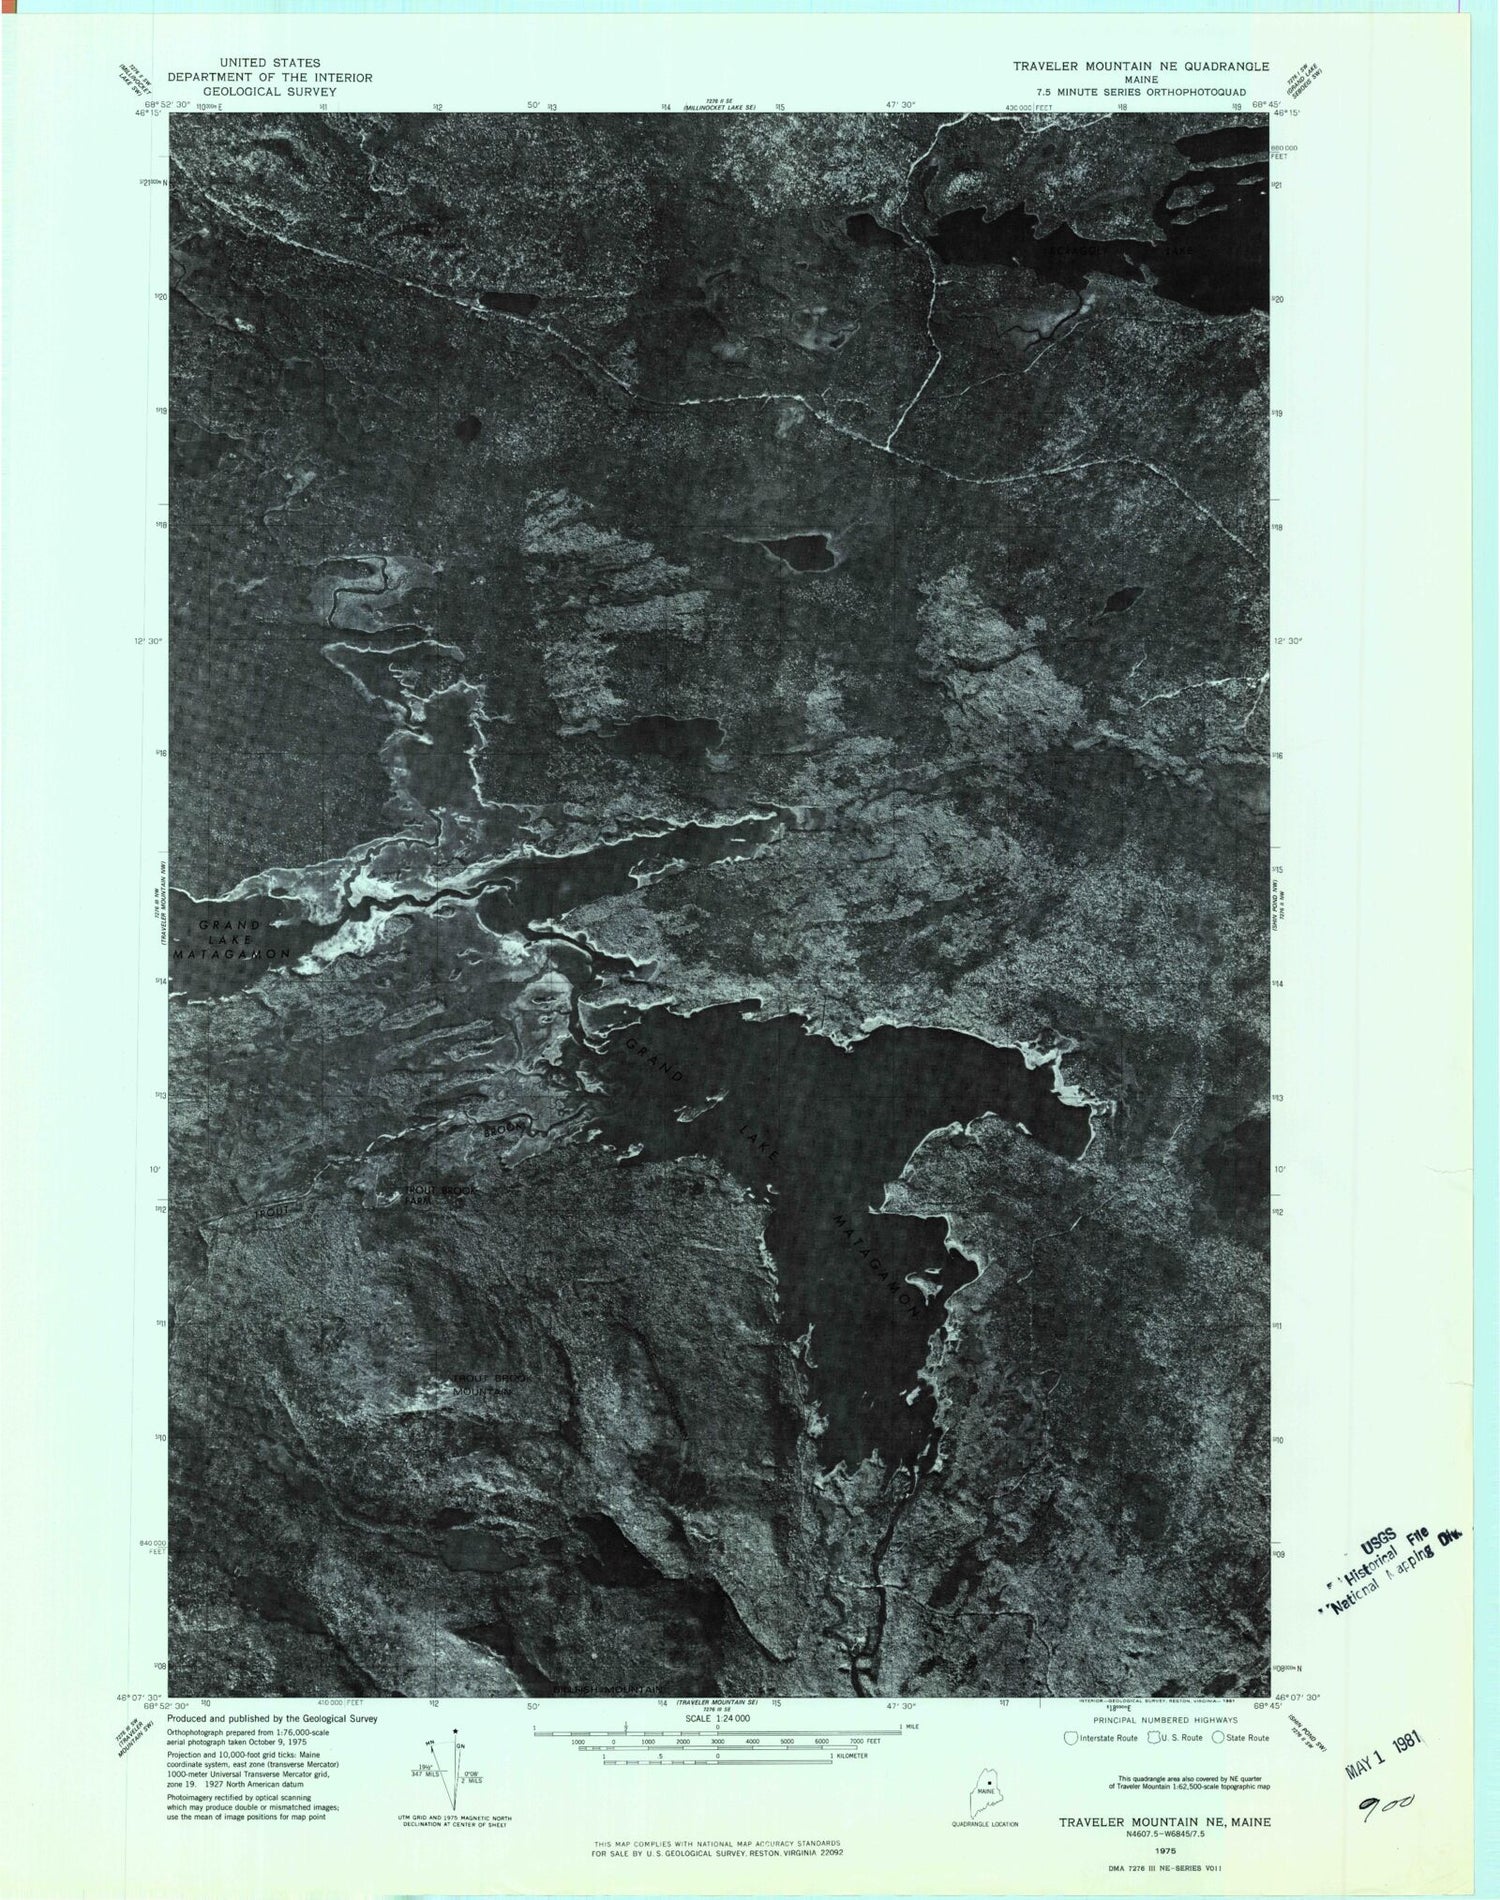 Classic USGS Trout Brook Mountain Maine 7.5'x7.5' Topo Map Image